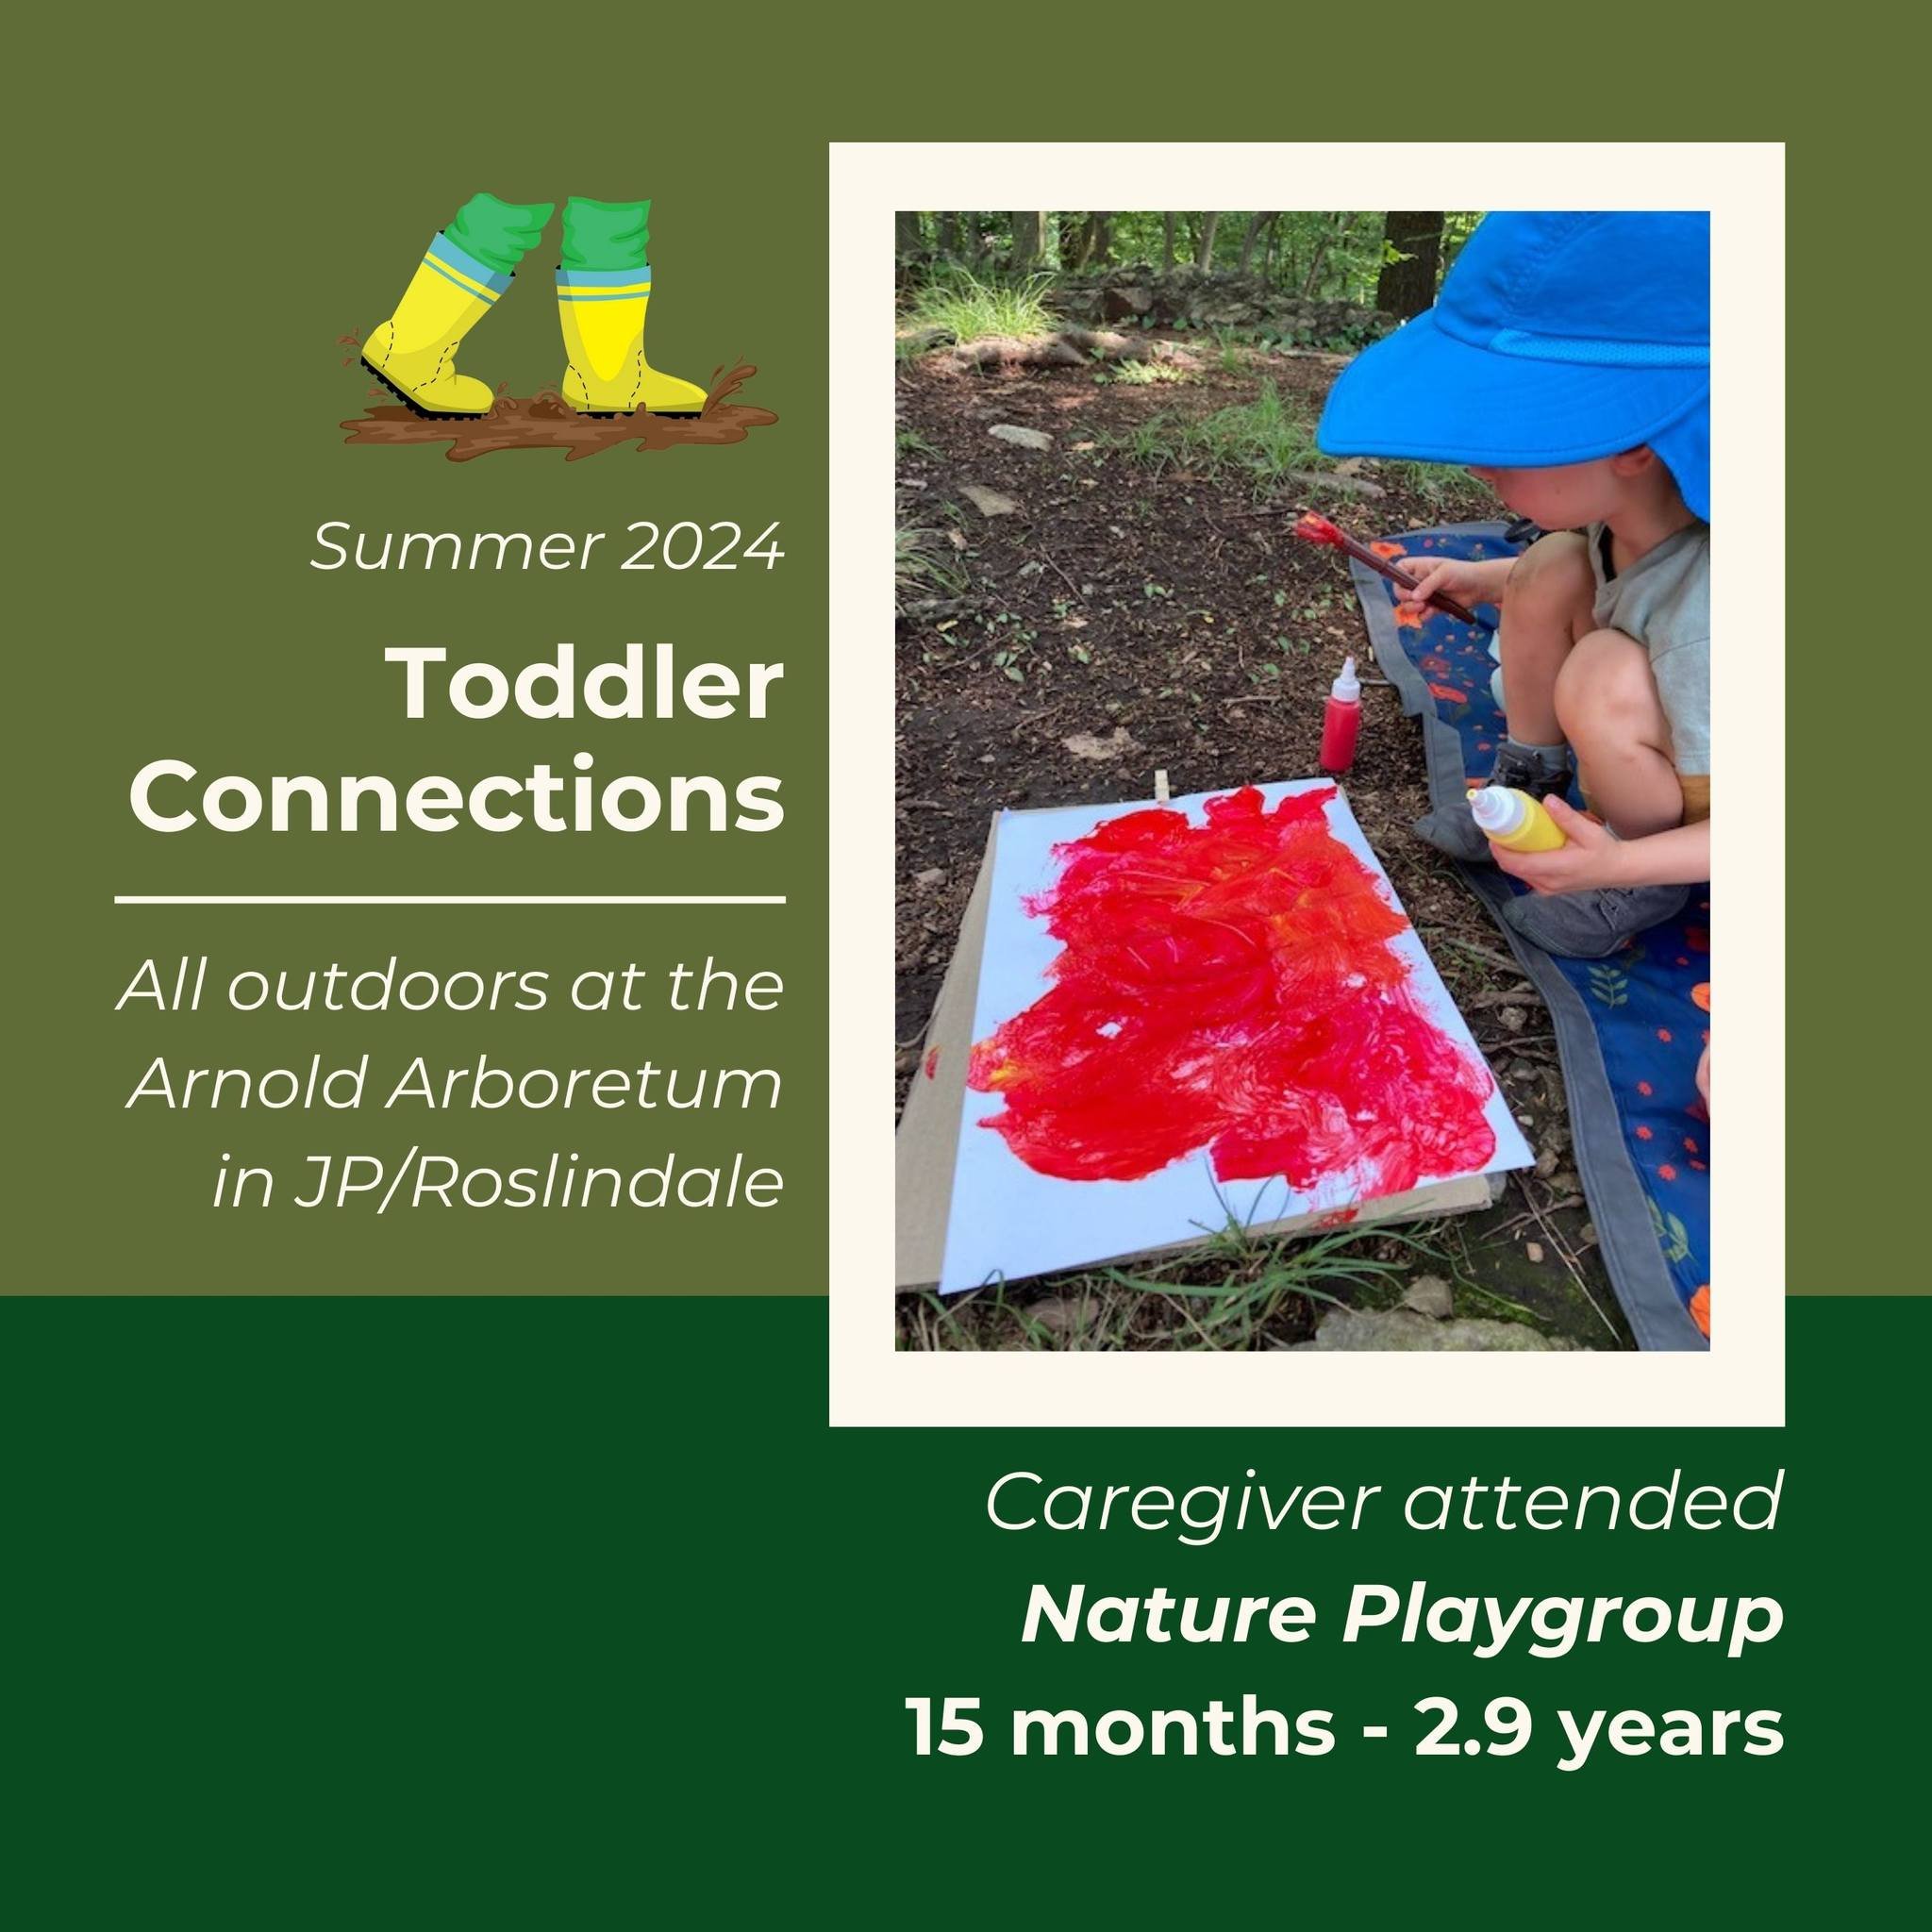 Registration is open for our summer session of Toddler Connections! This popular nature playgroup is led by BOPN Co-Founder, Sara Murray at the @arnold_arboretum. Created specifically for toddlers aged 15 months to 2.9 years, families connect with th